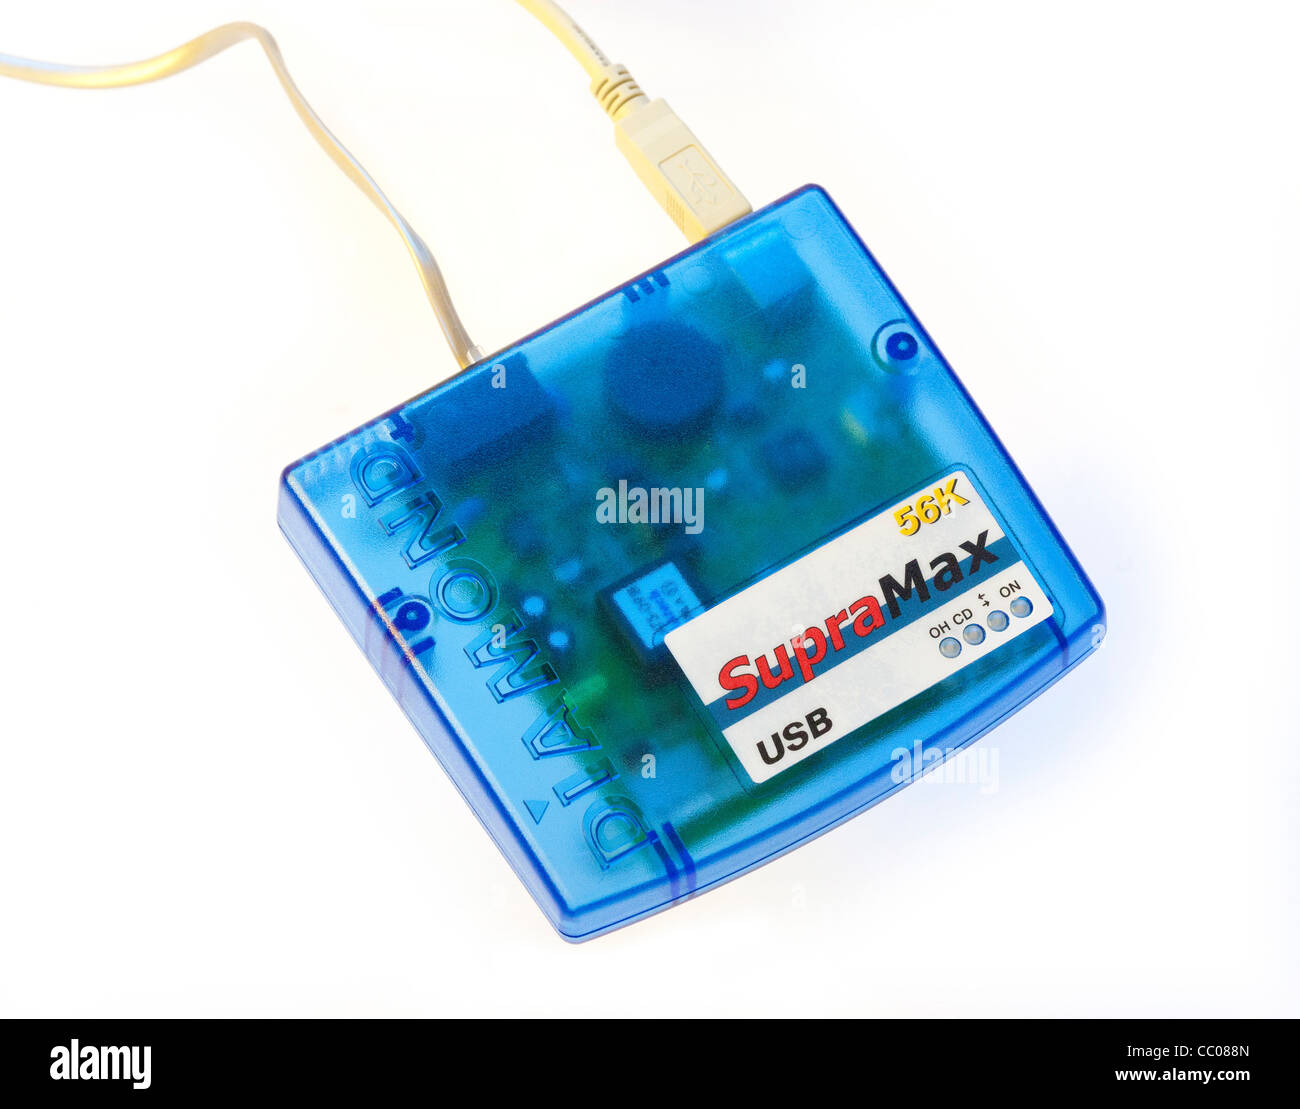 Dial up modem Out Stock Images & Pictures - Alamy